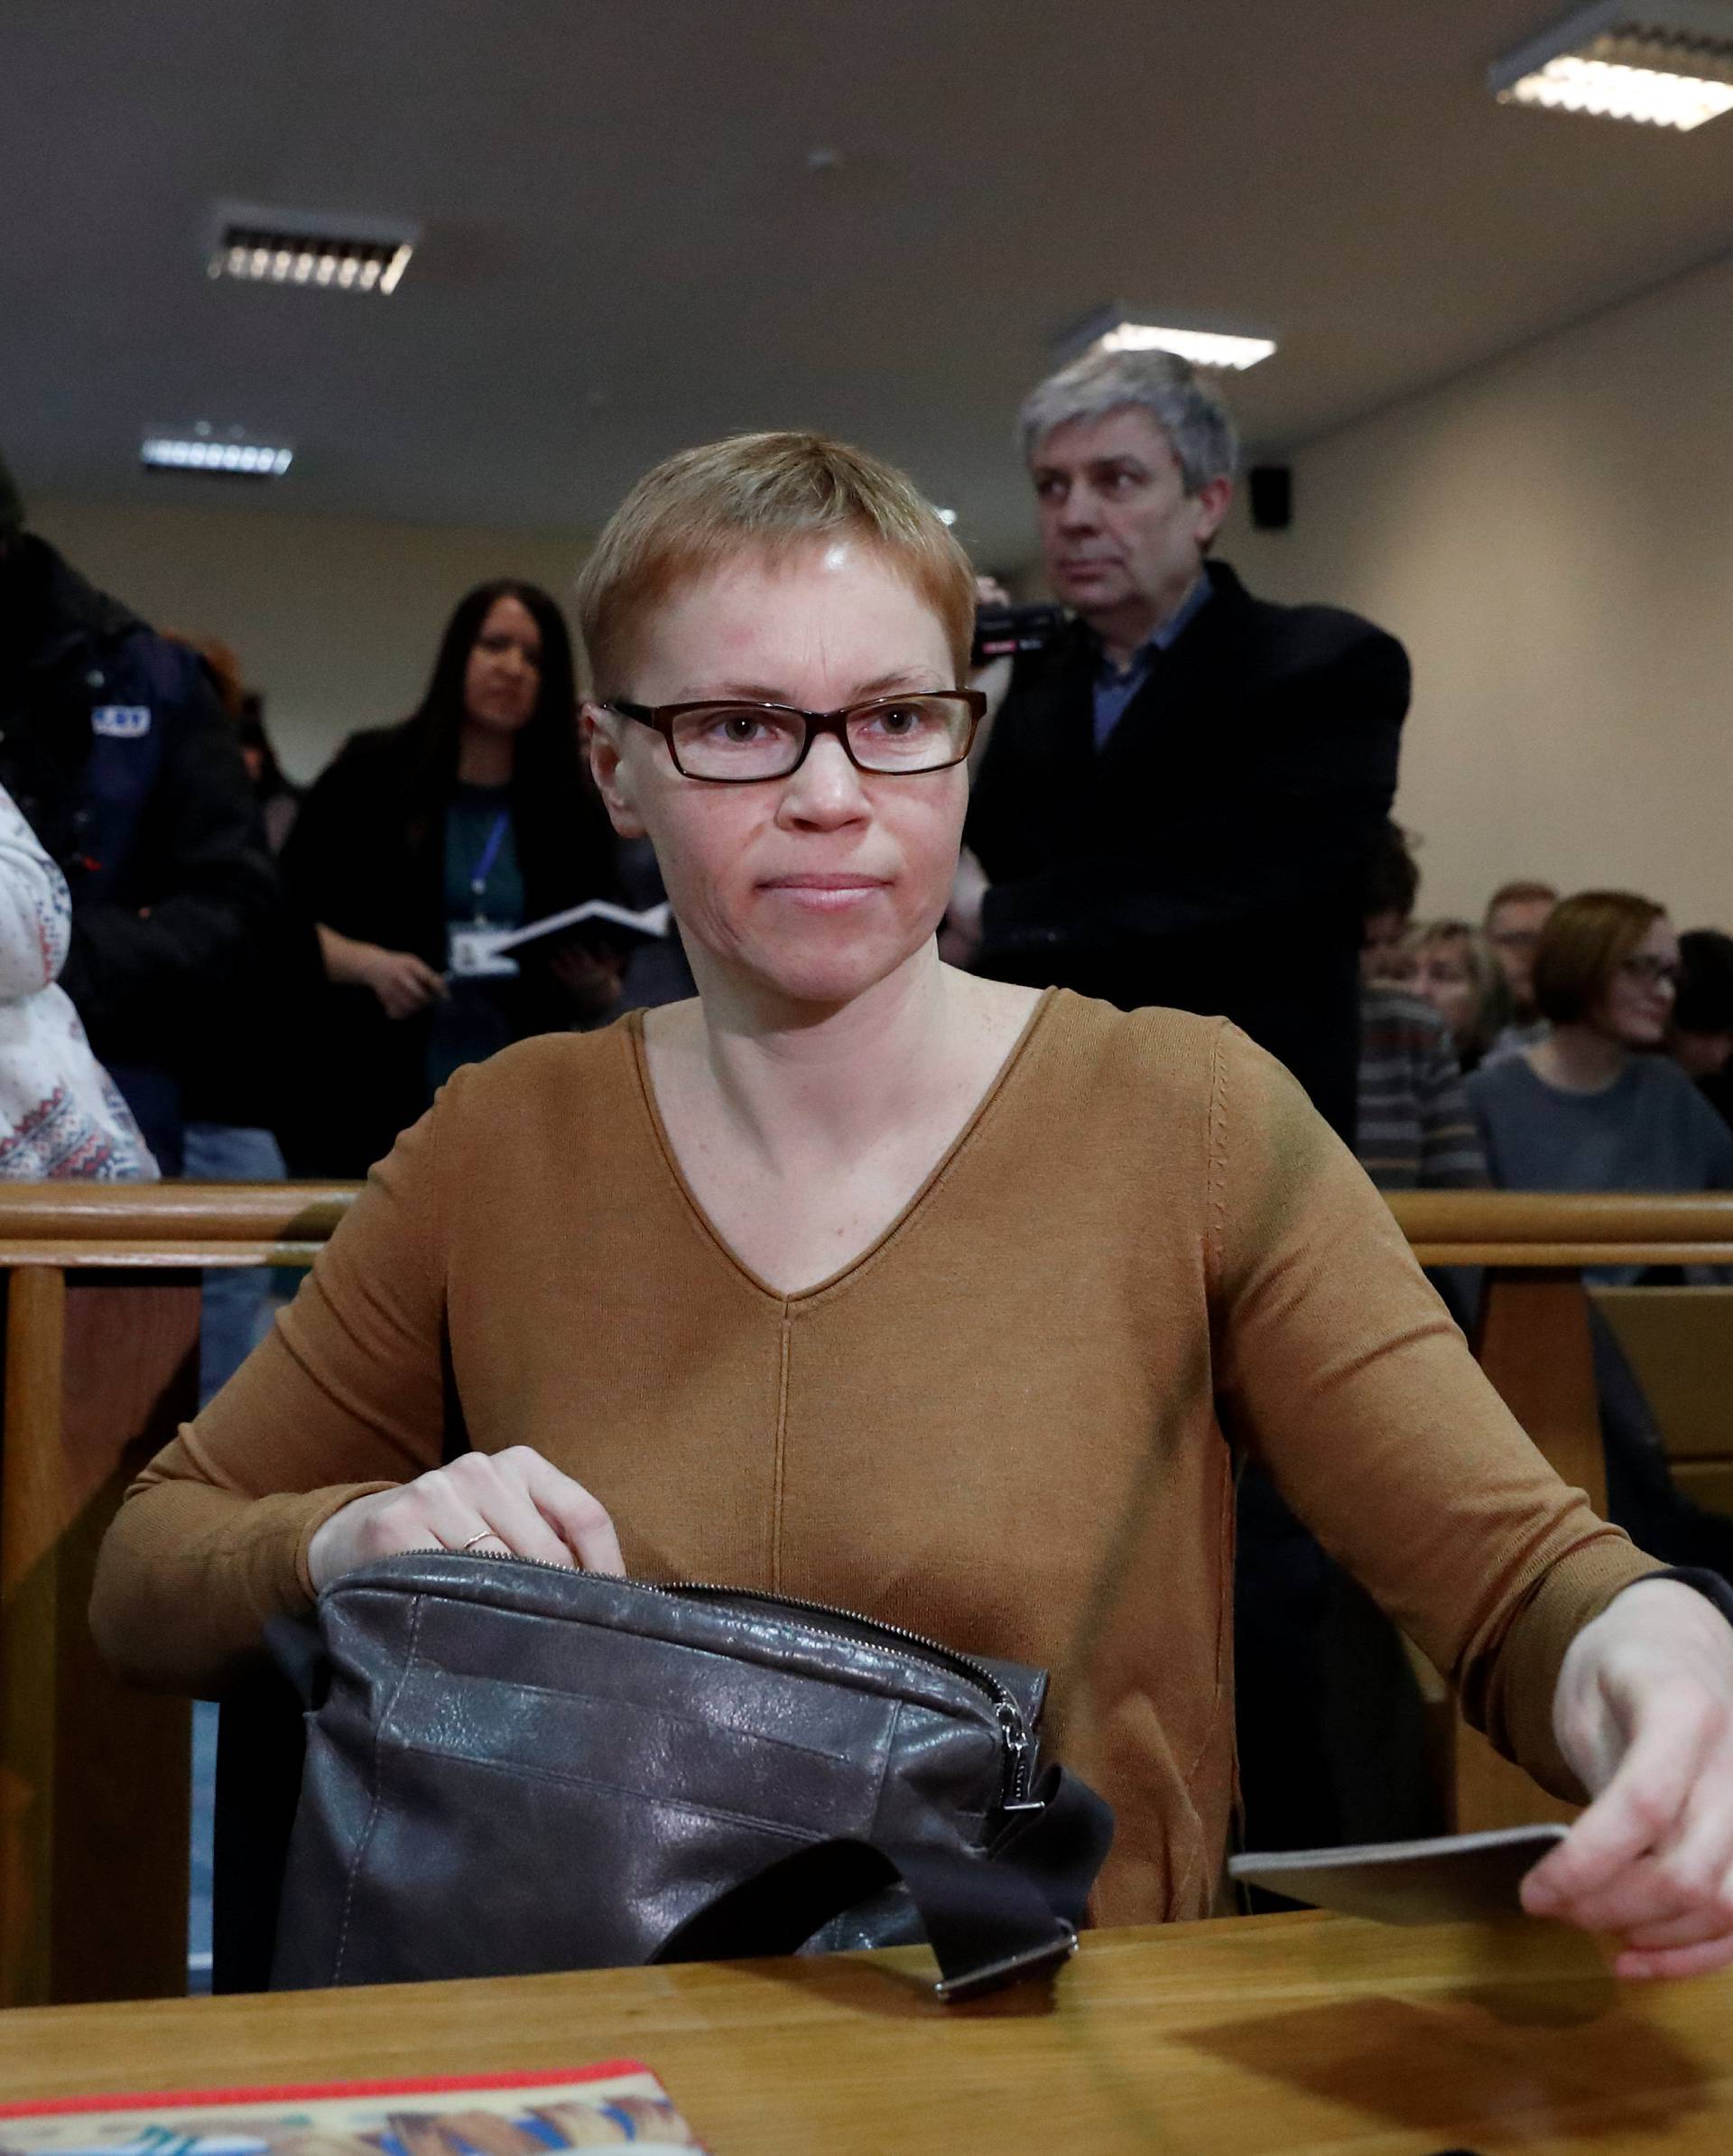 Zolotova, editor-in-chief of Tut.by independent news website, who was accused of illegally obtaining information from a state-run news agency, arrives to attend a court hearing in Minsk